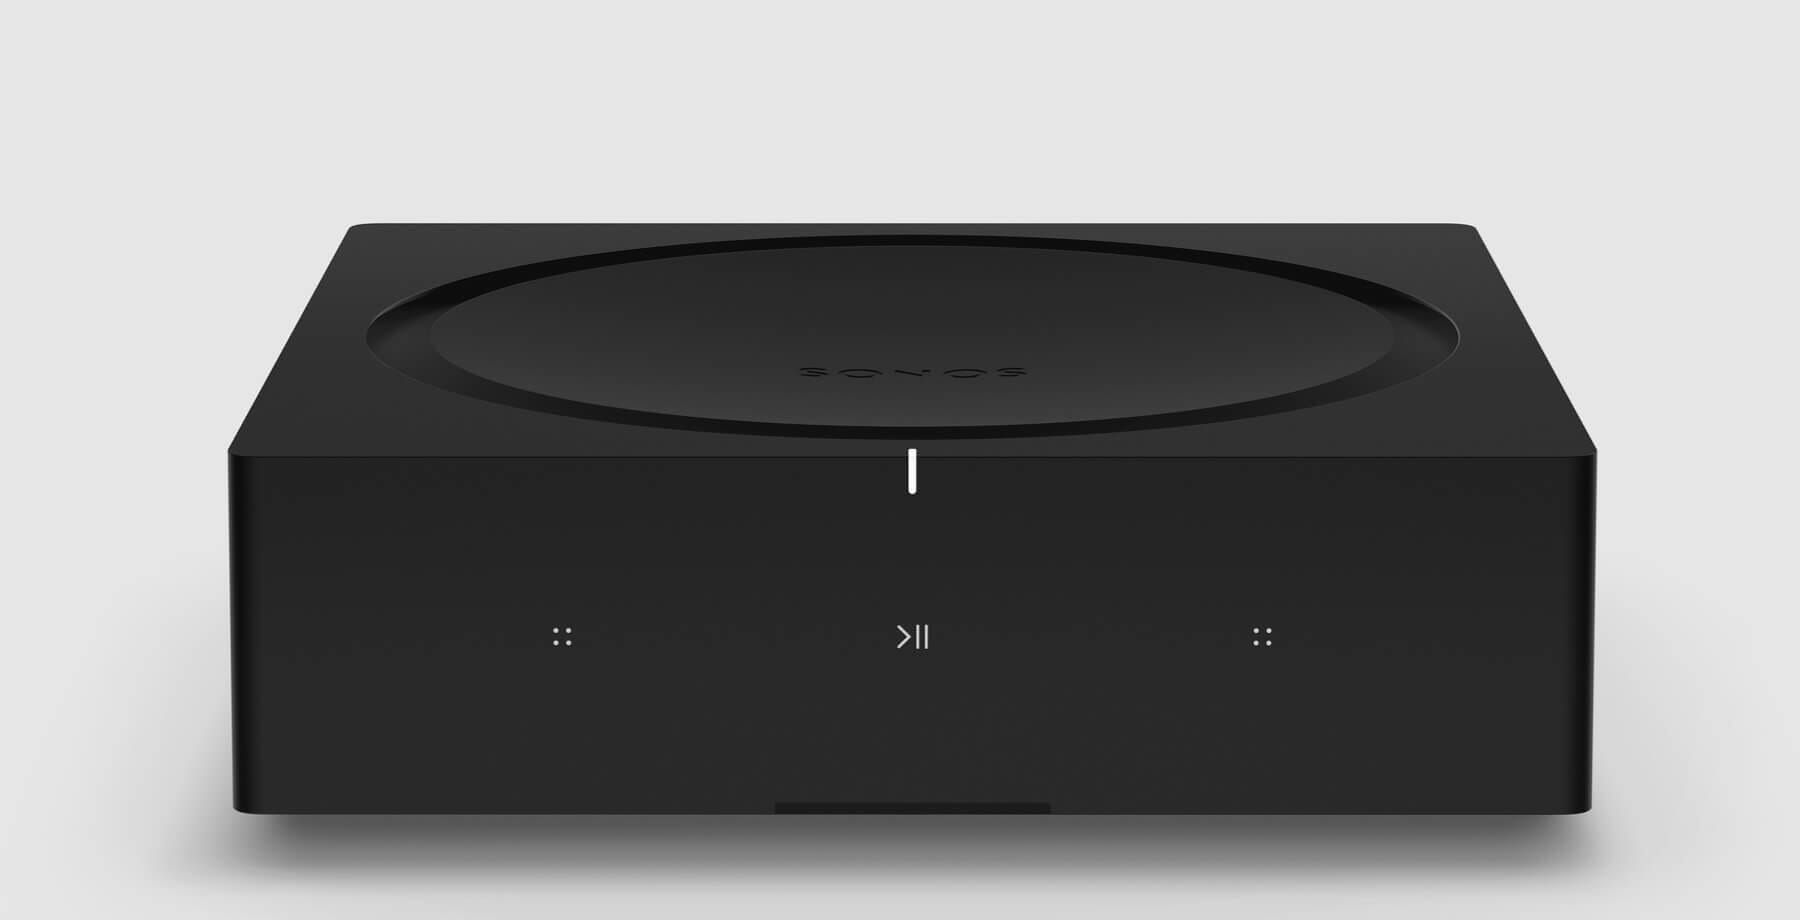 More Power, More Possibilities with Sonos Amp